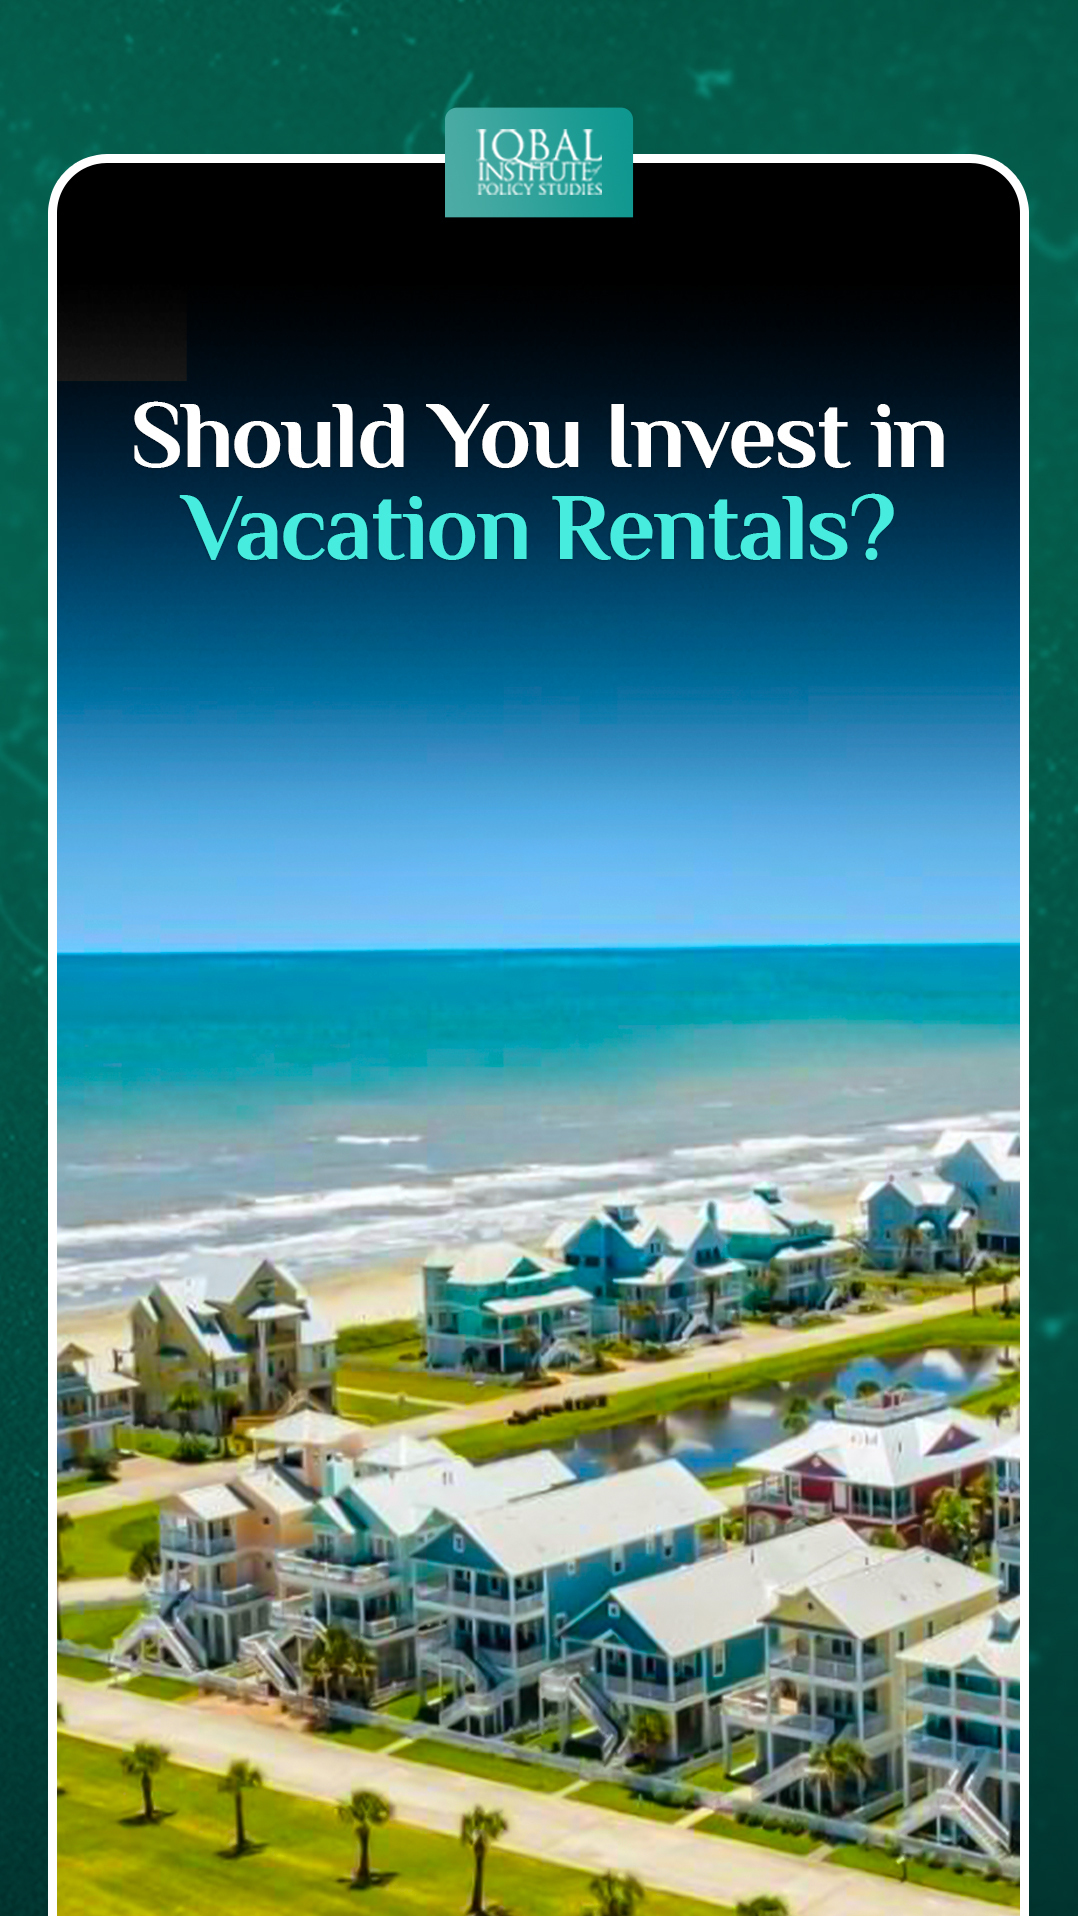 Should You Invest in Vacation Rentals?